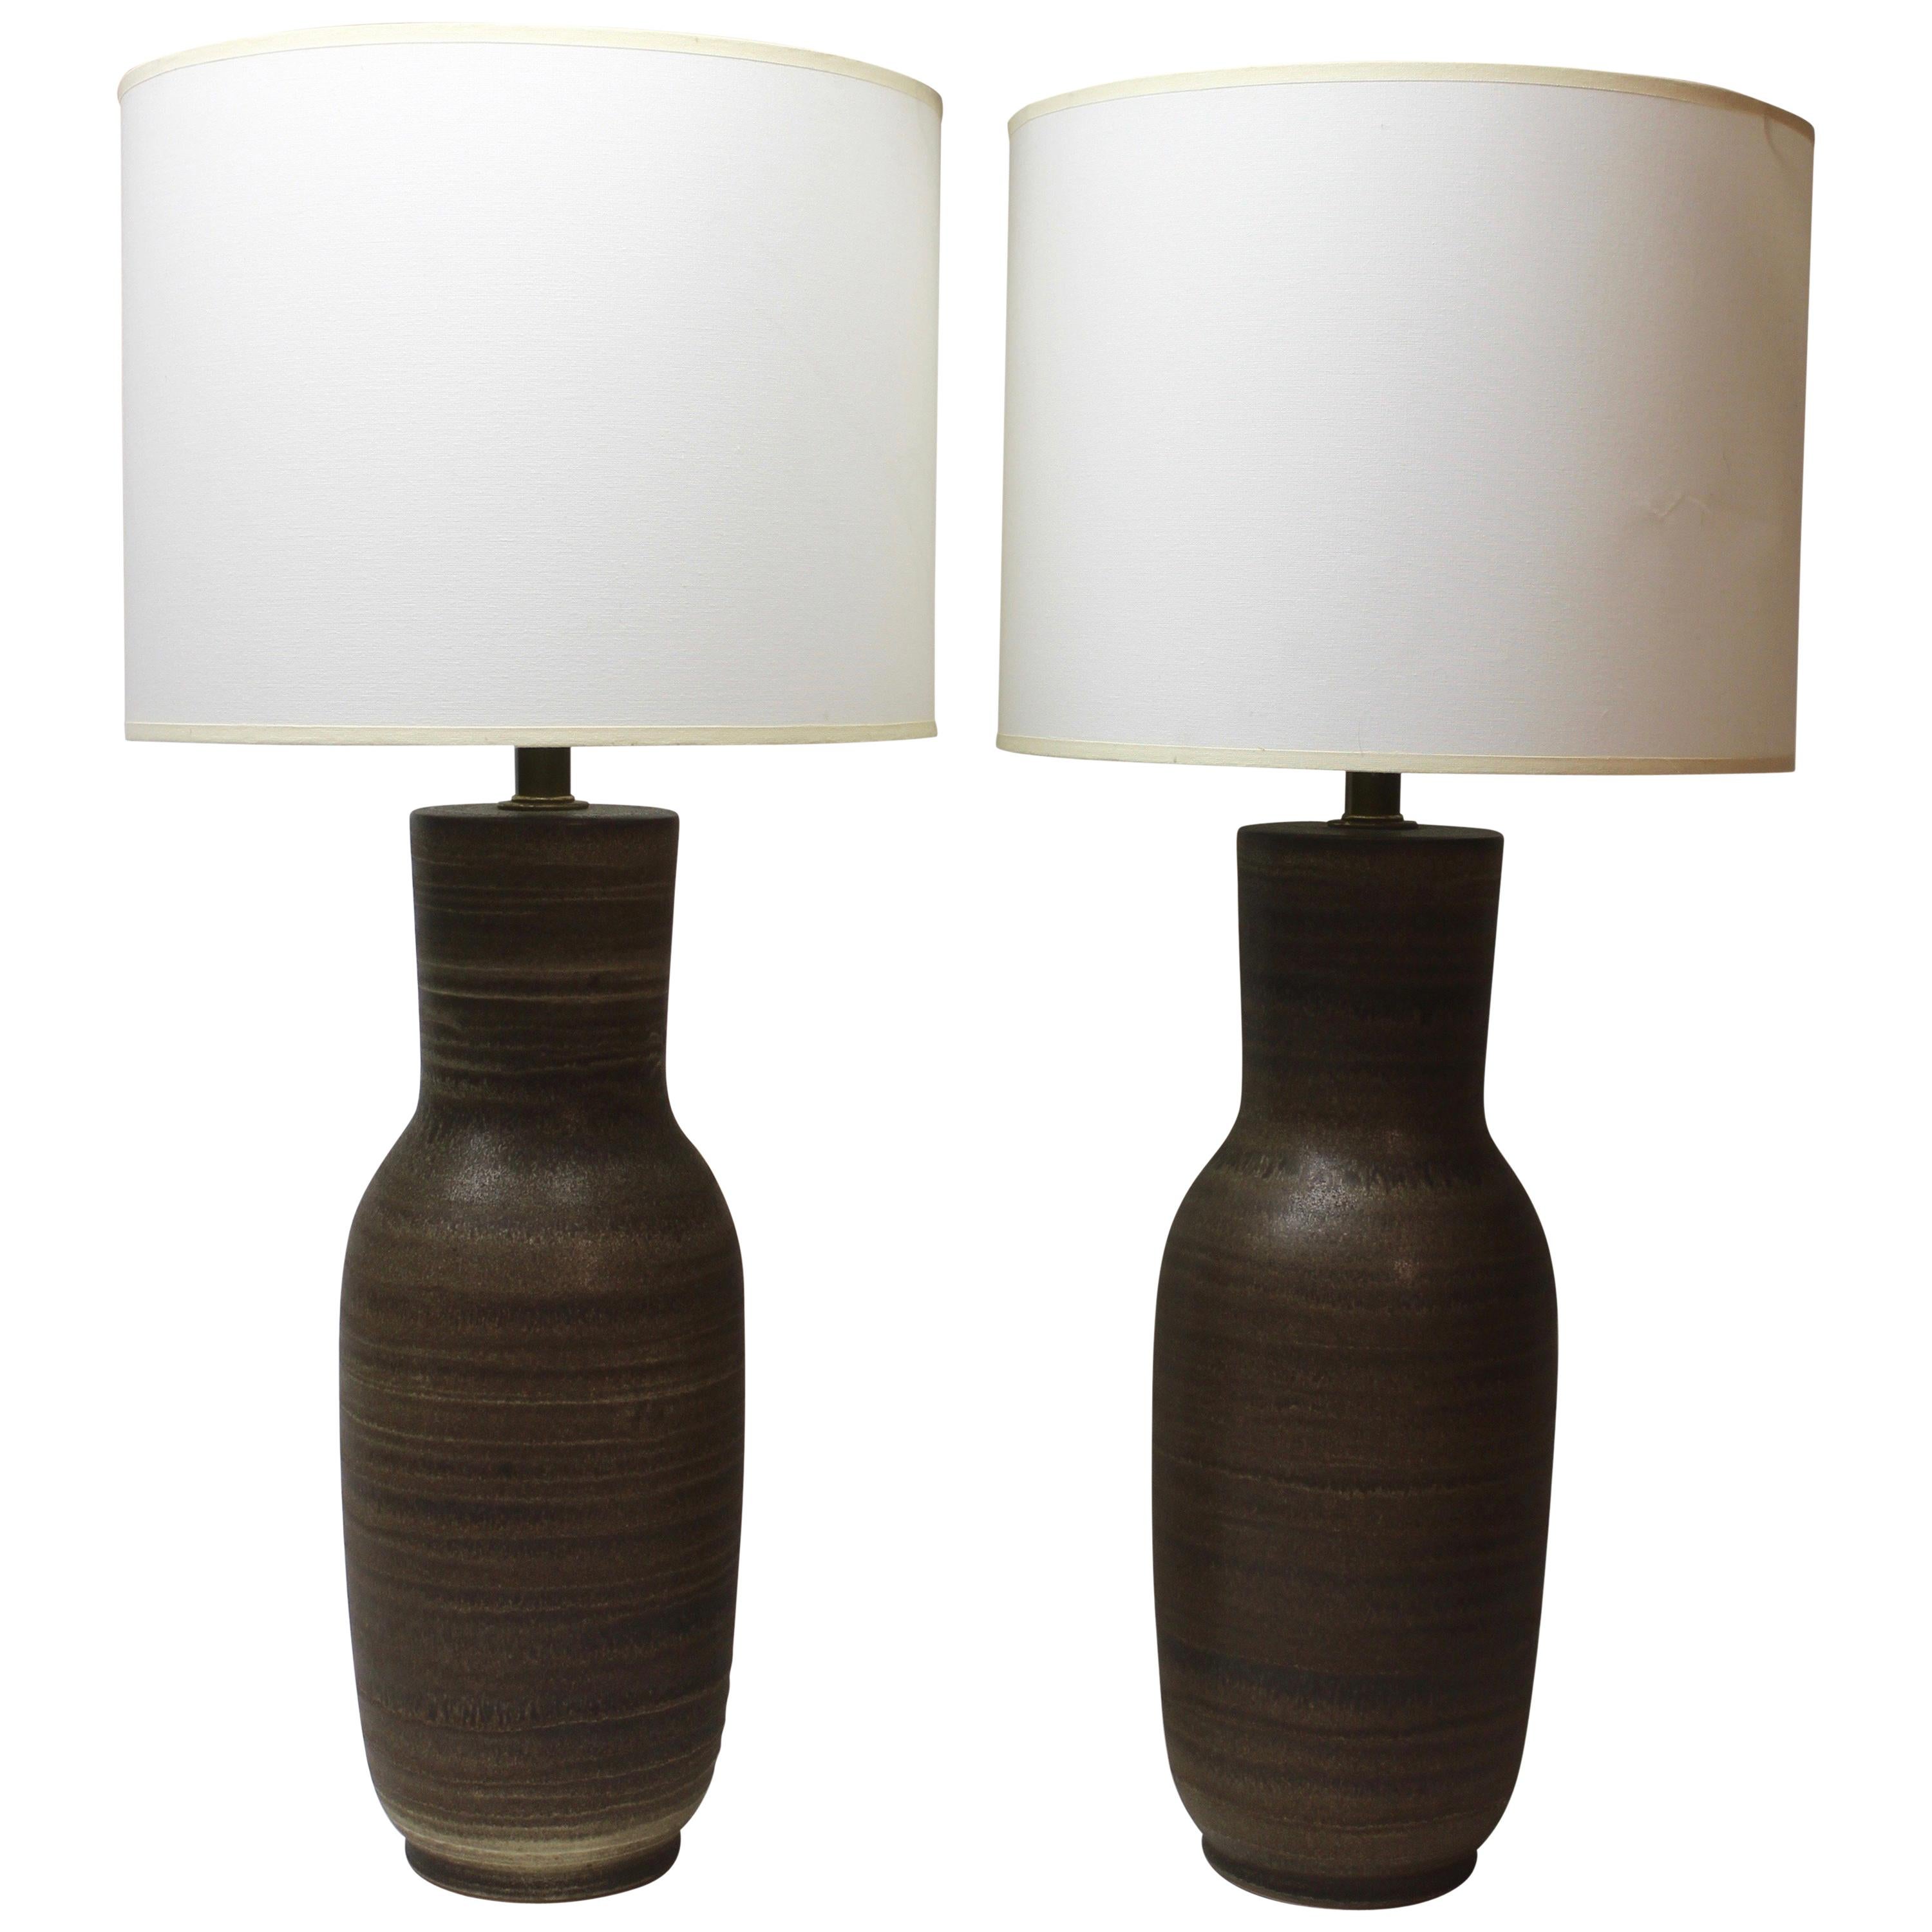 Pair of Tall Ceramic Table Lamps by Design Technics